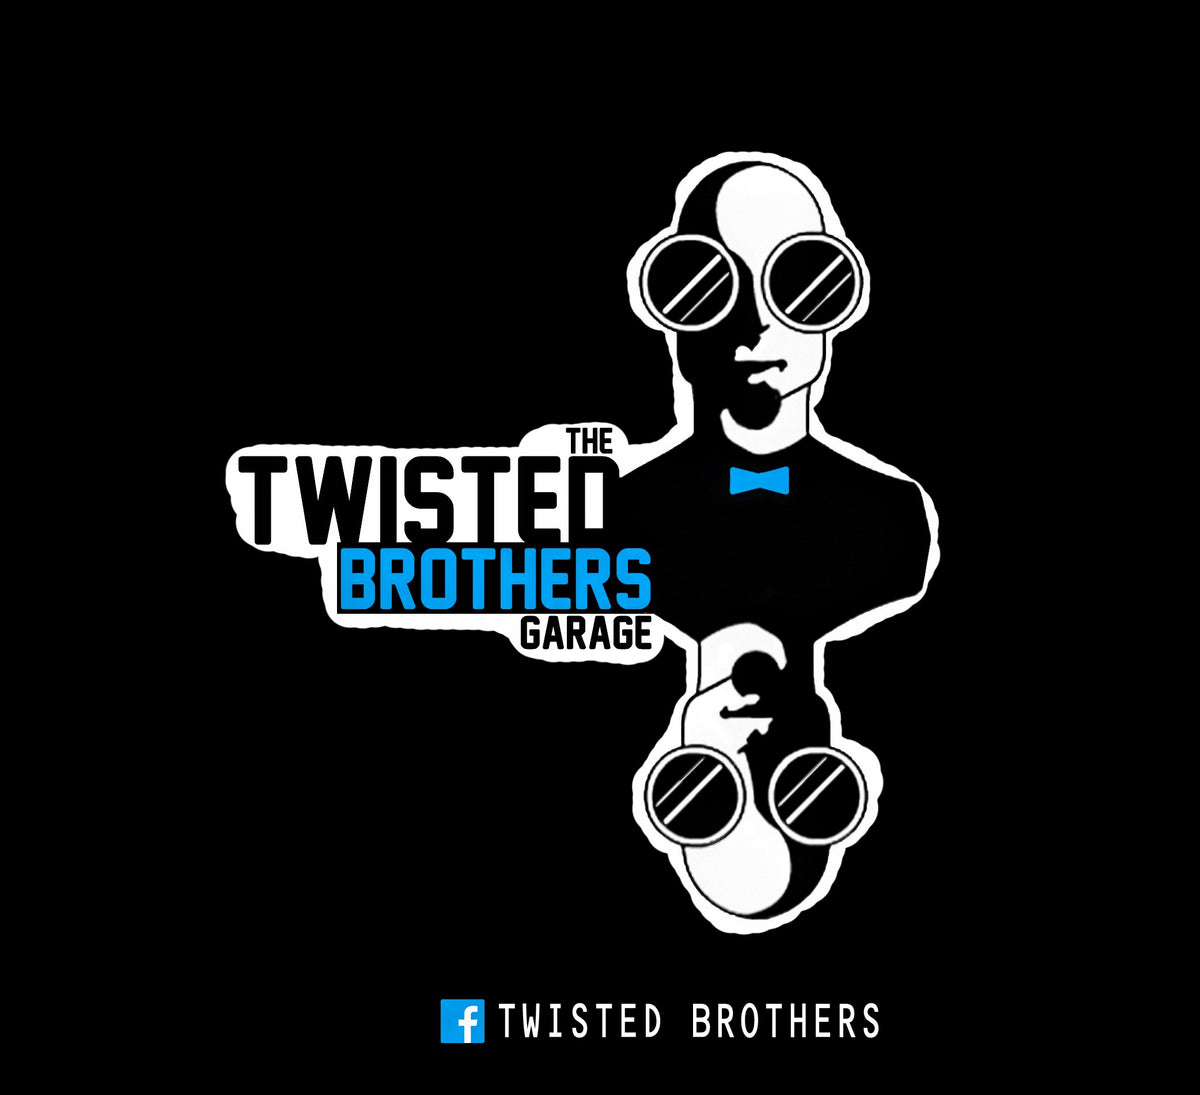 www.twisted-brothers.com